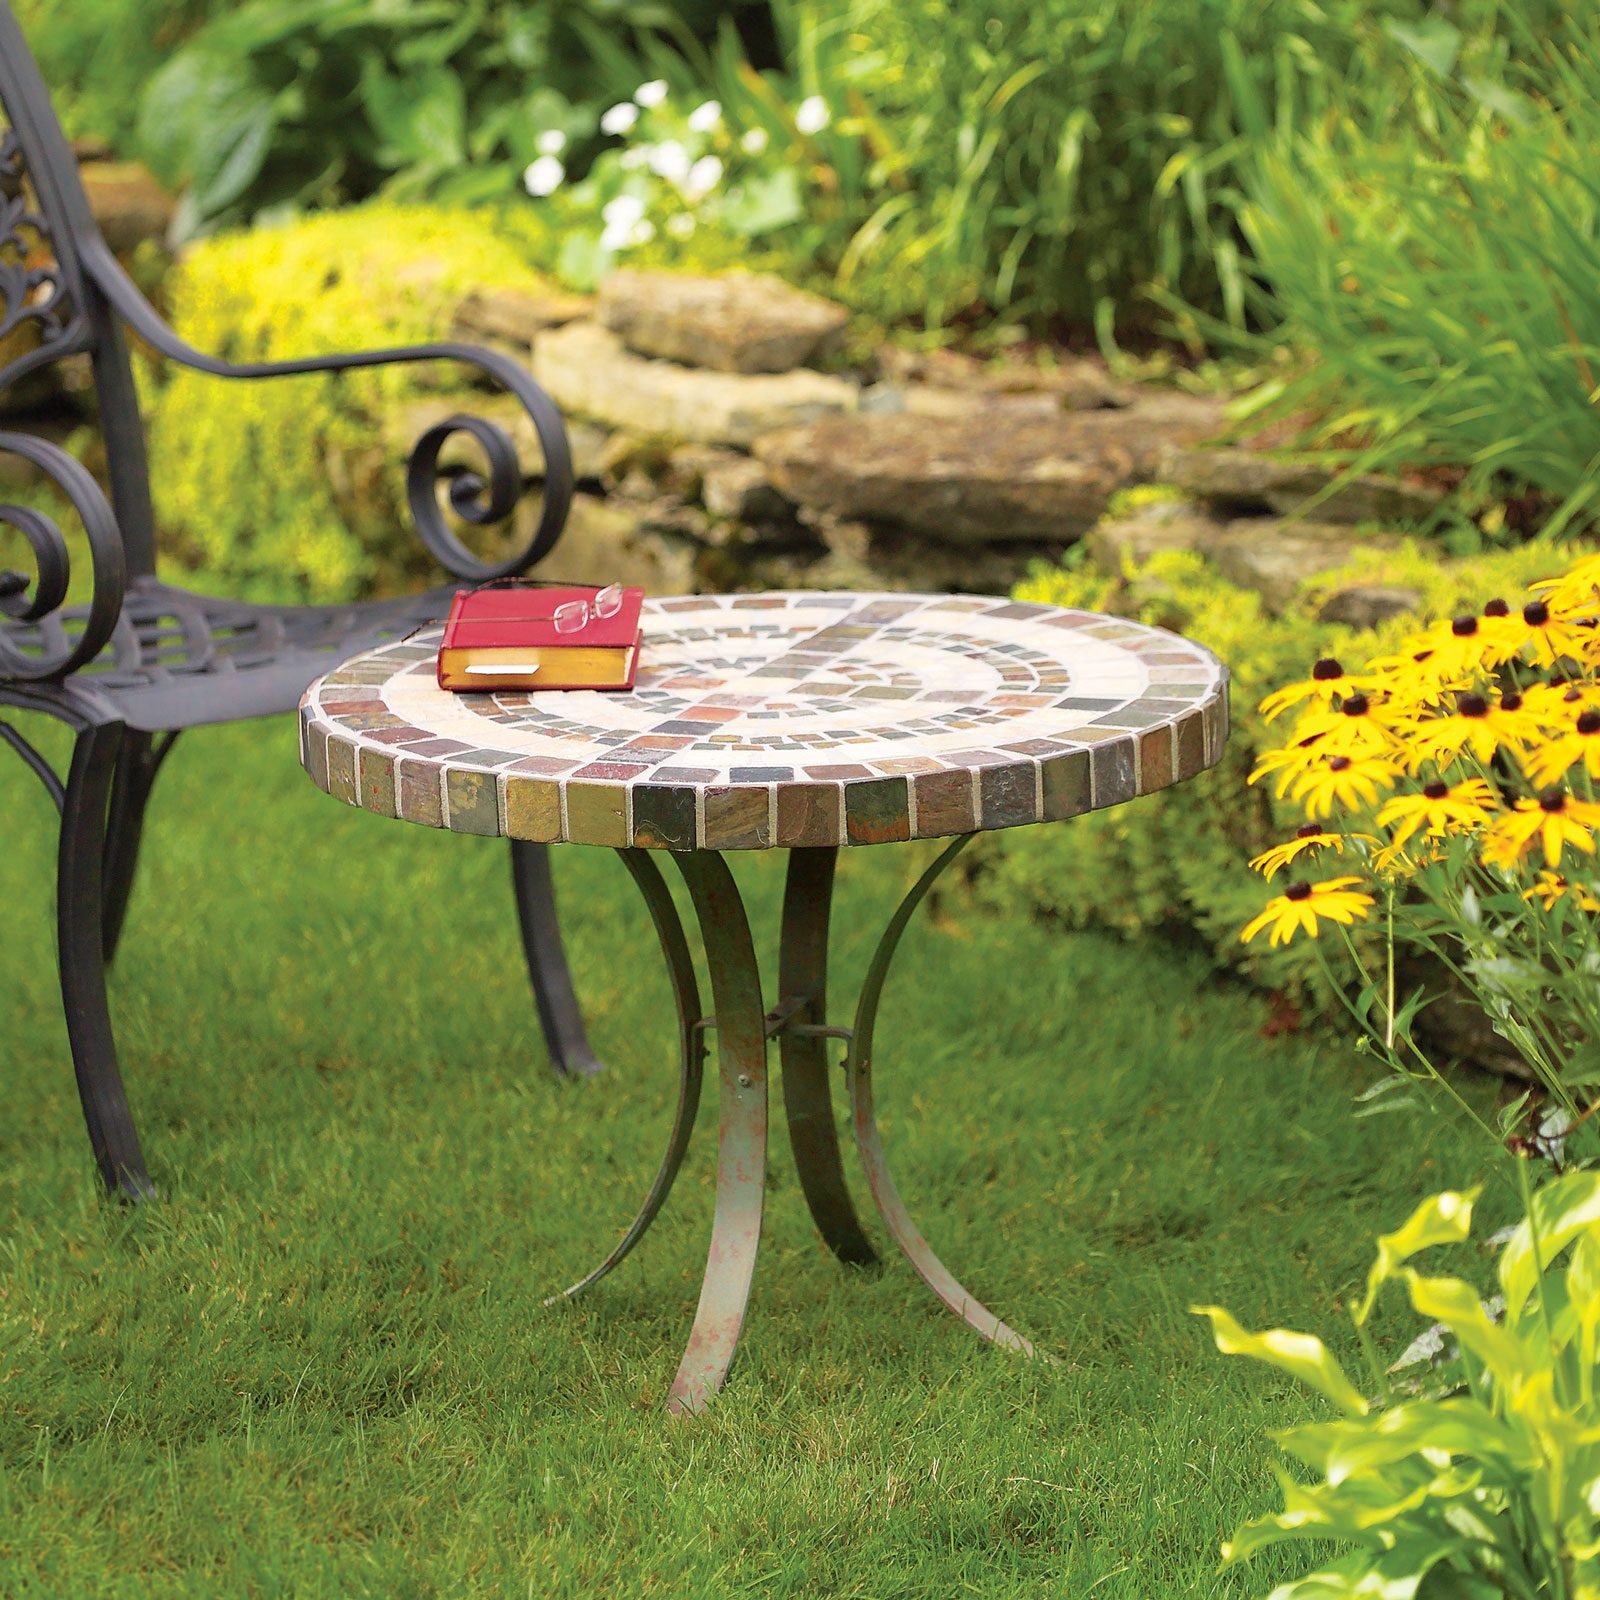 Build This Outdoor Table with a Tile Top to Give Your Patio a Hip Cafe Look